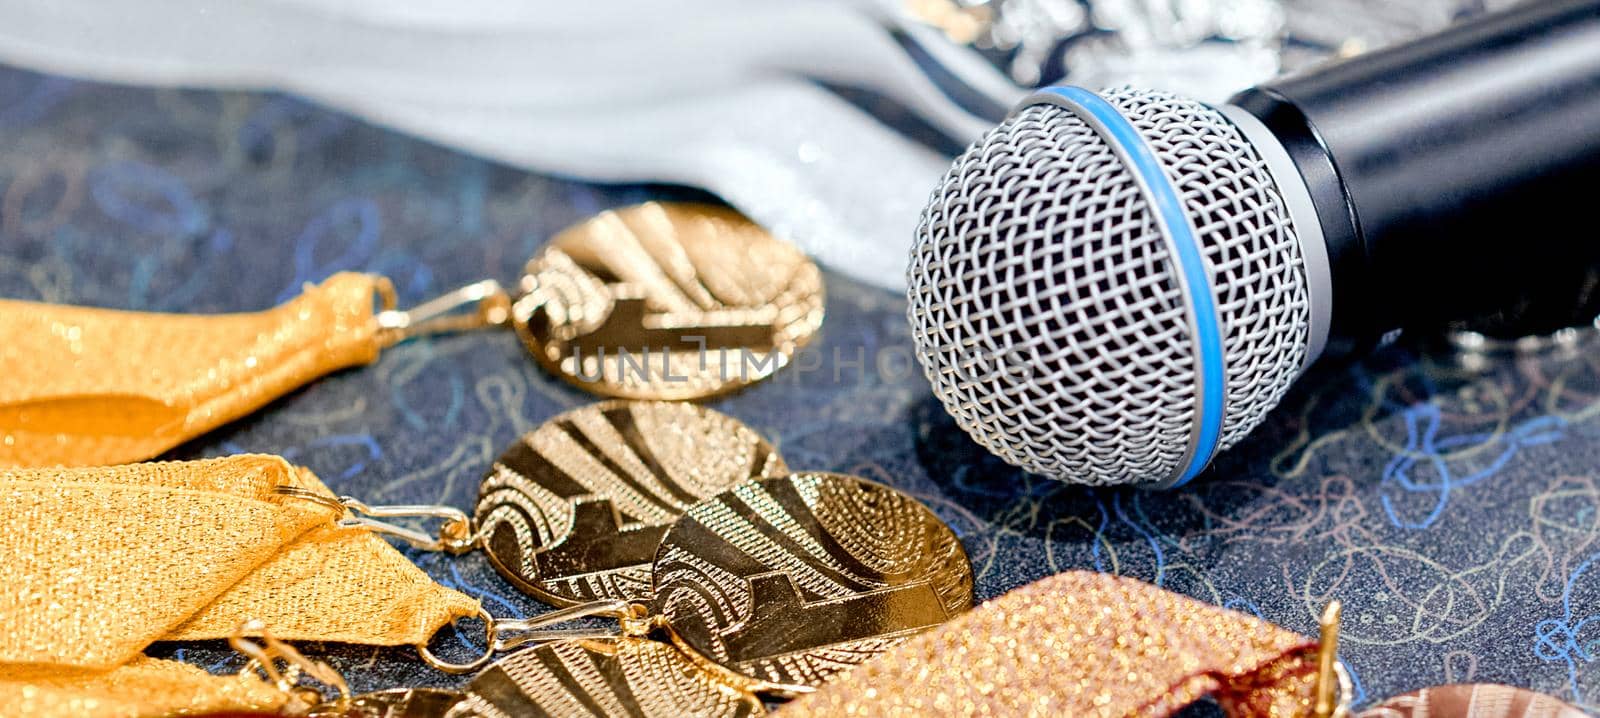 Awards, medals with ribbons on the table with a microphone by AntonIlchanka